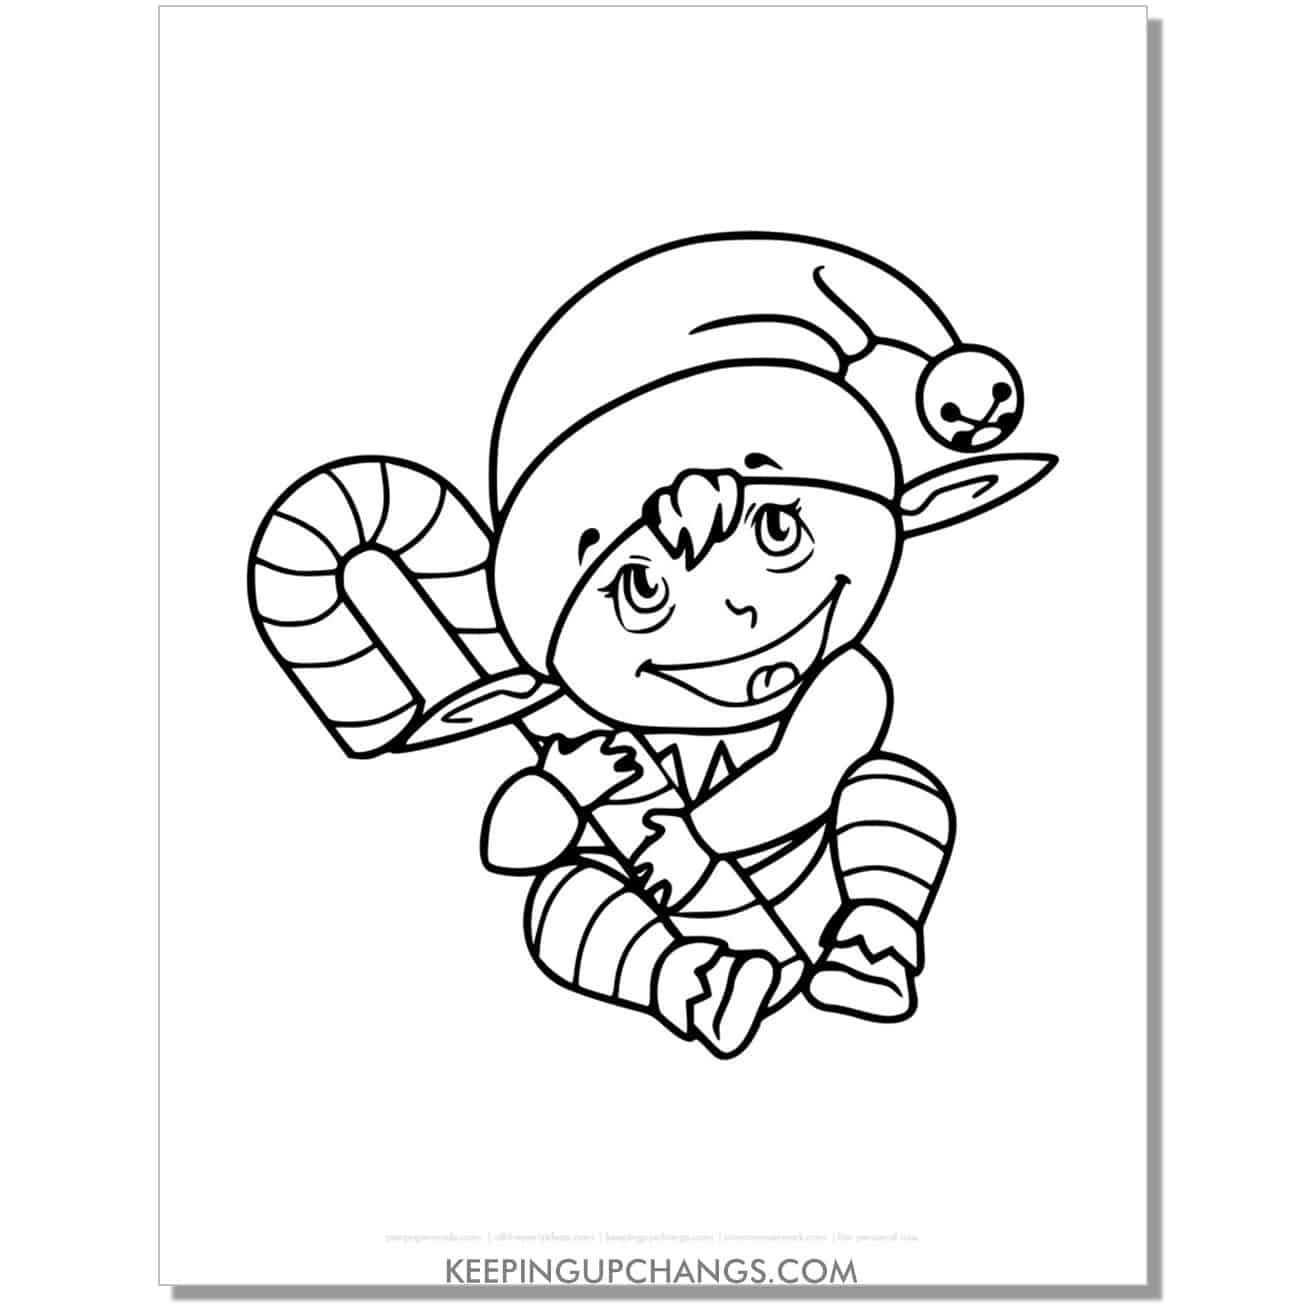 free baby elf with candy cane coloring page.